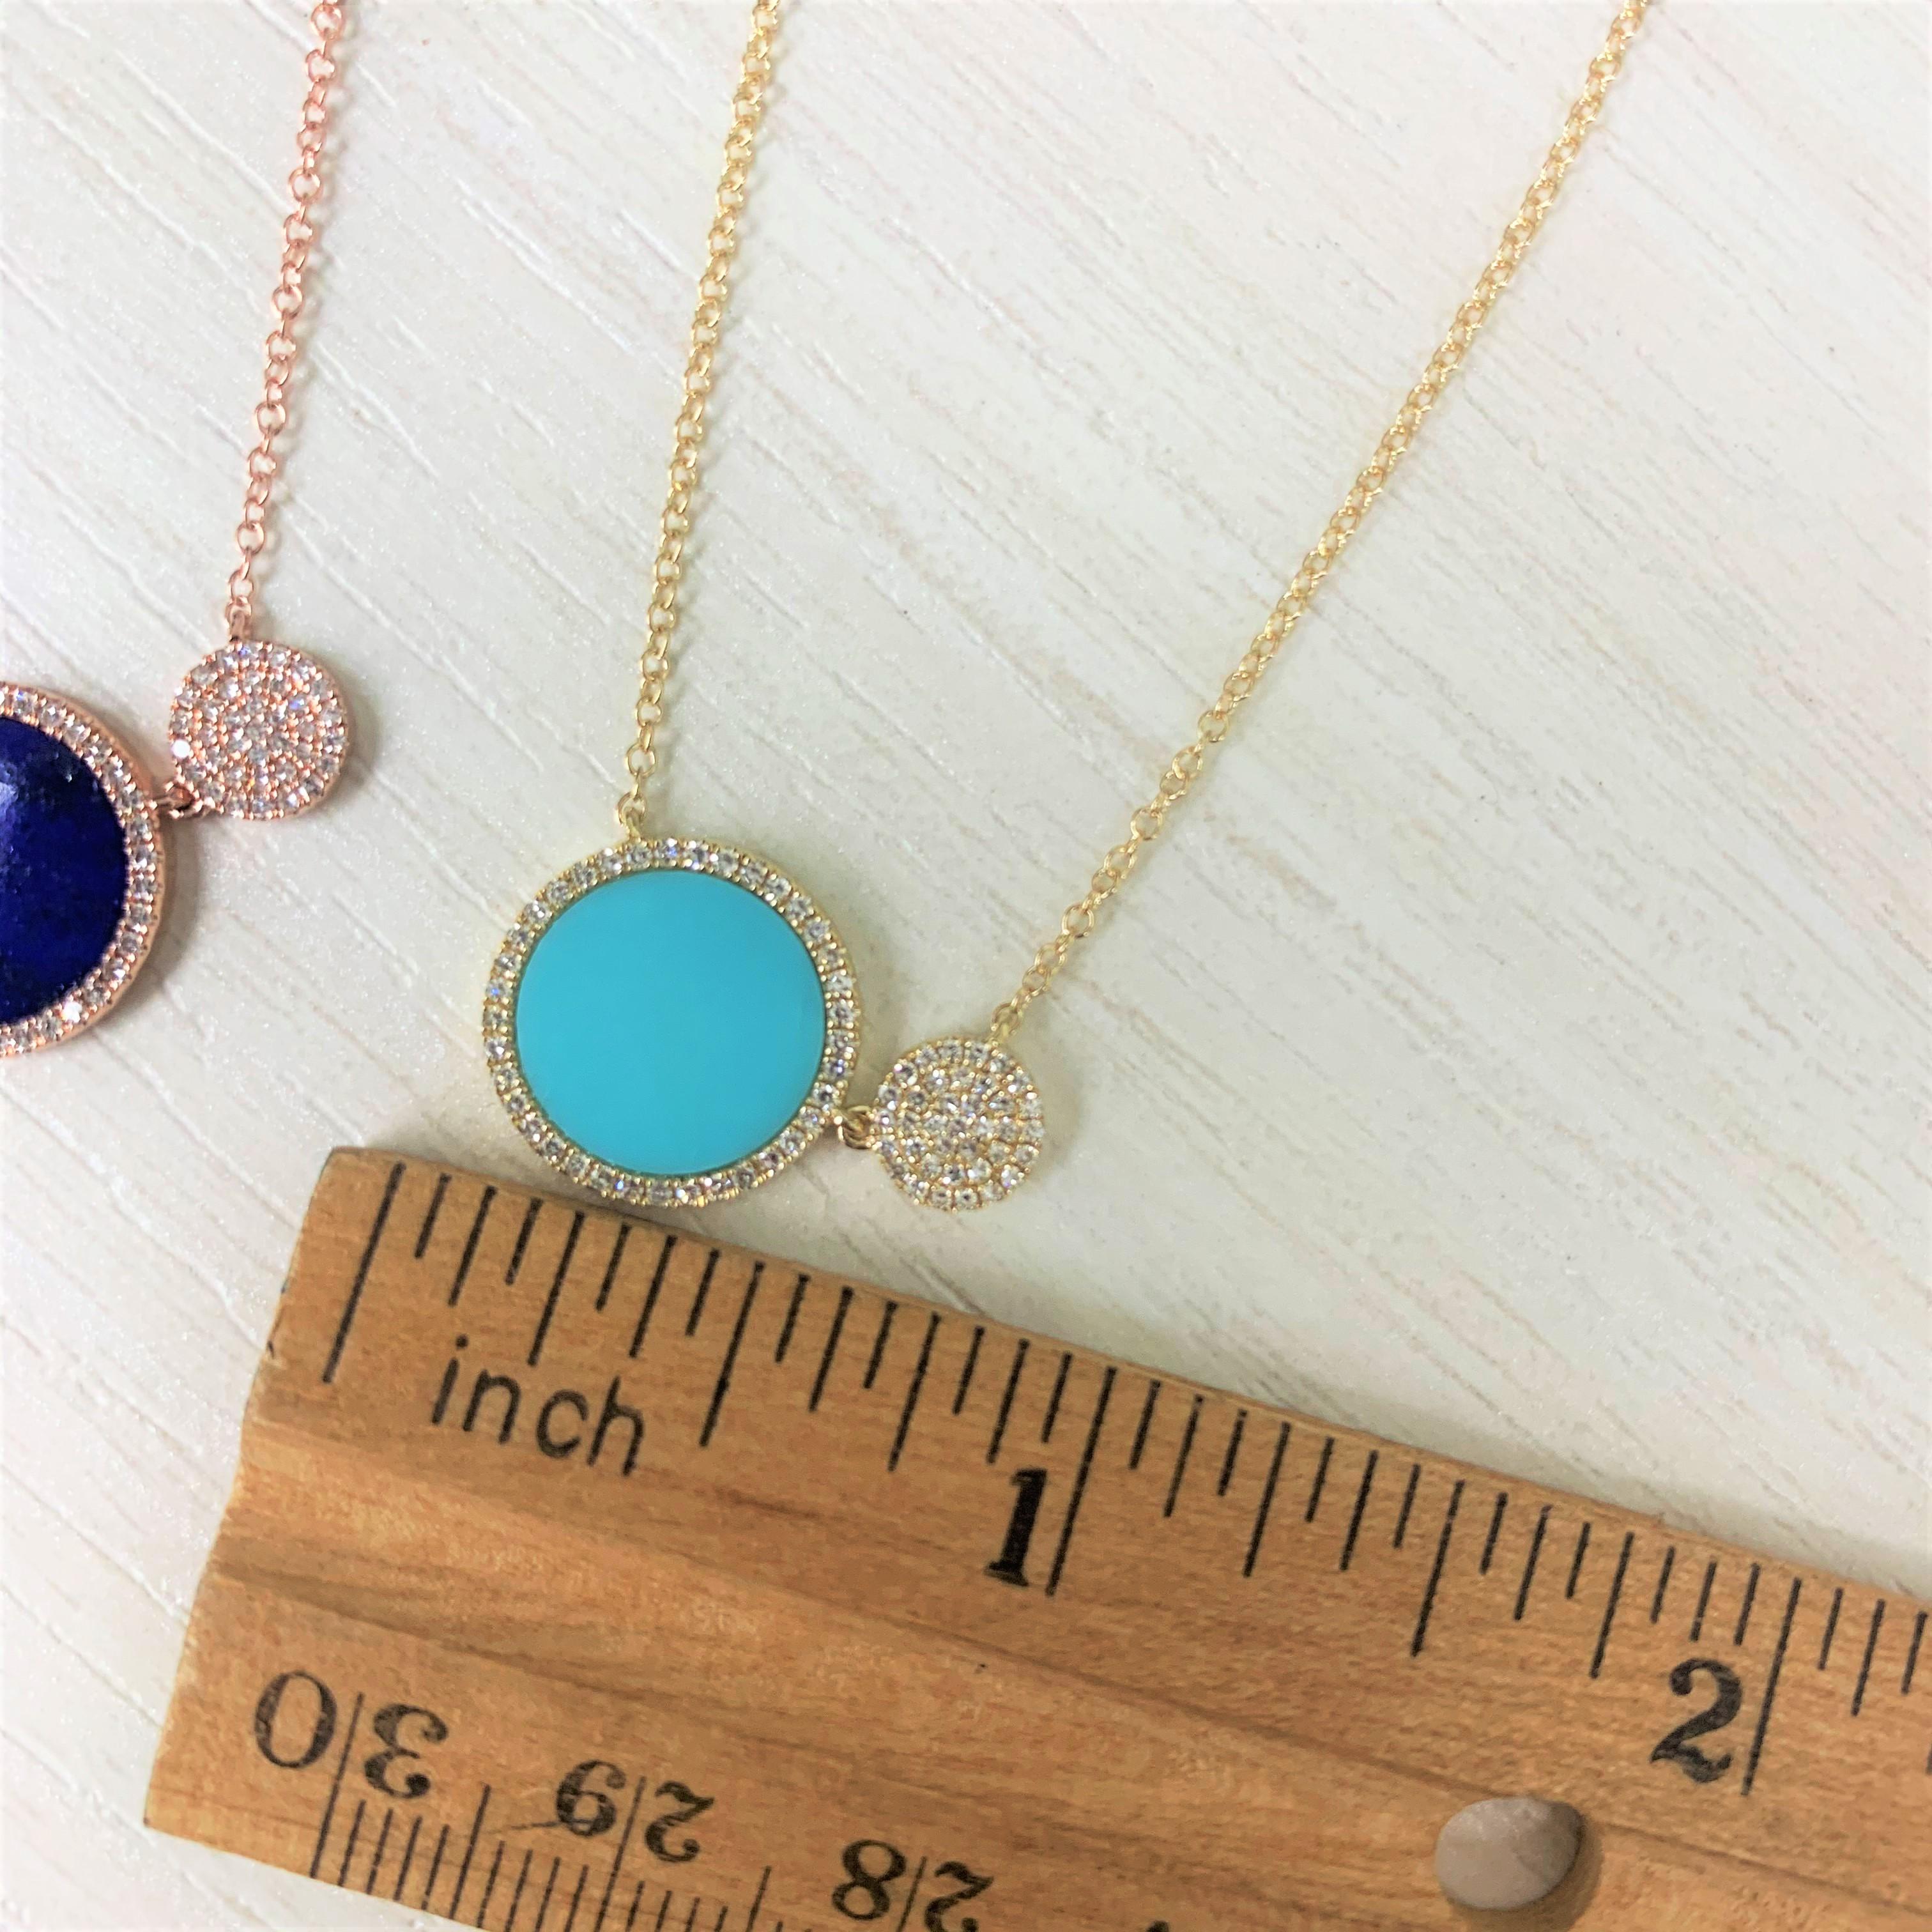 14 Karat Yellow Gold 0.22 Carat Diamond and Turquoise Pendant Necklace In New Condition For Sale In Great neck, NY